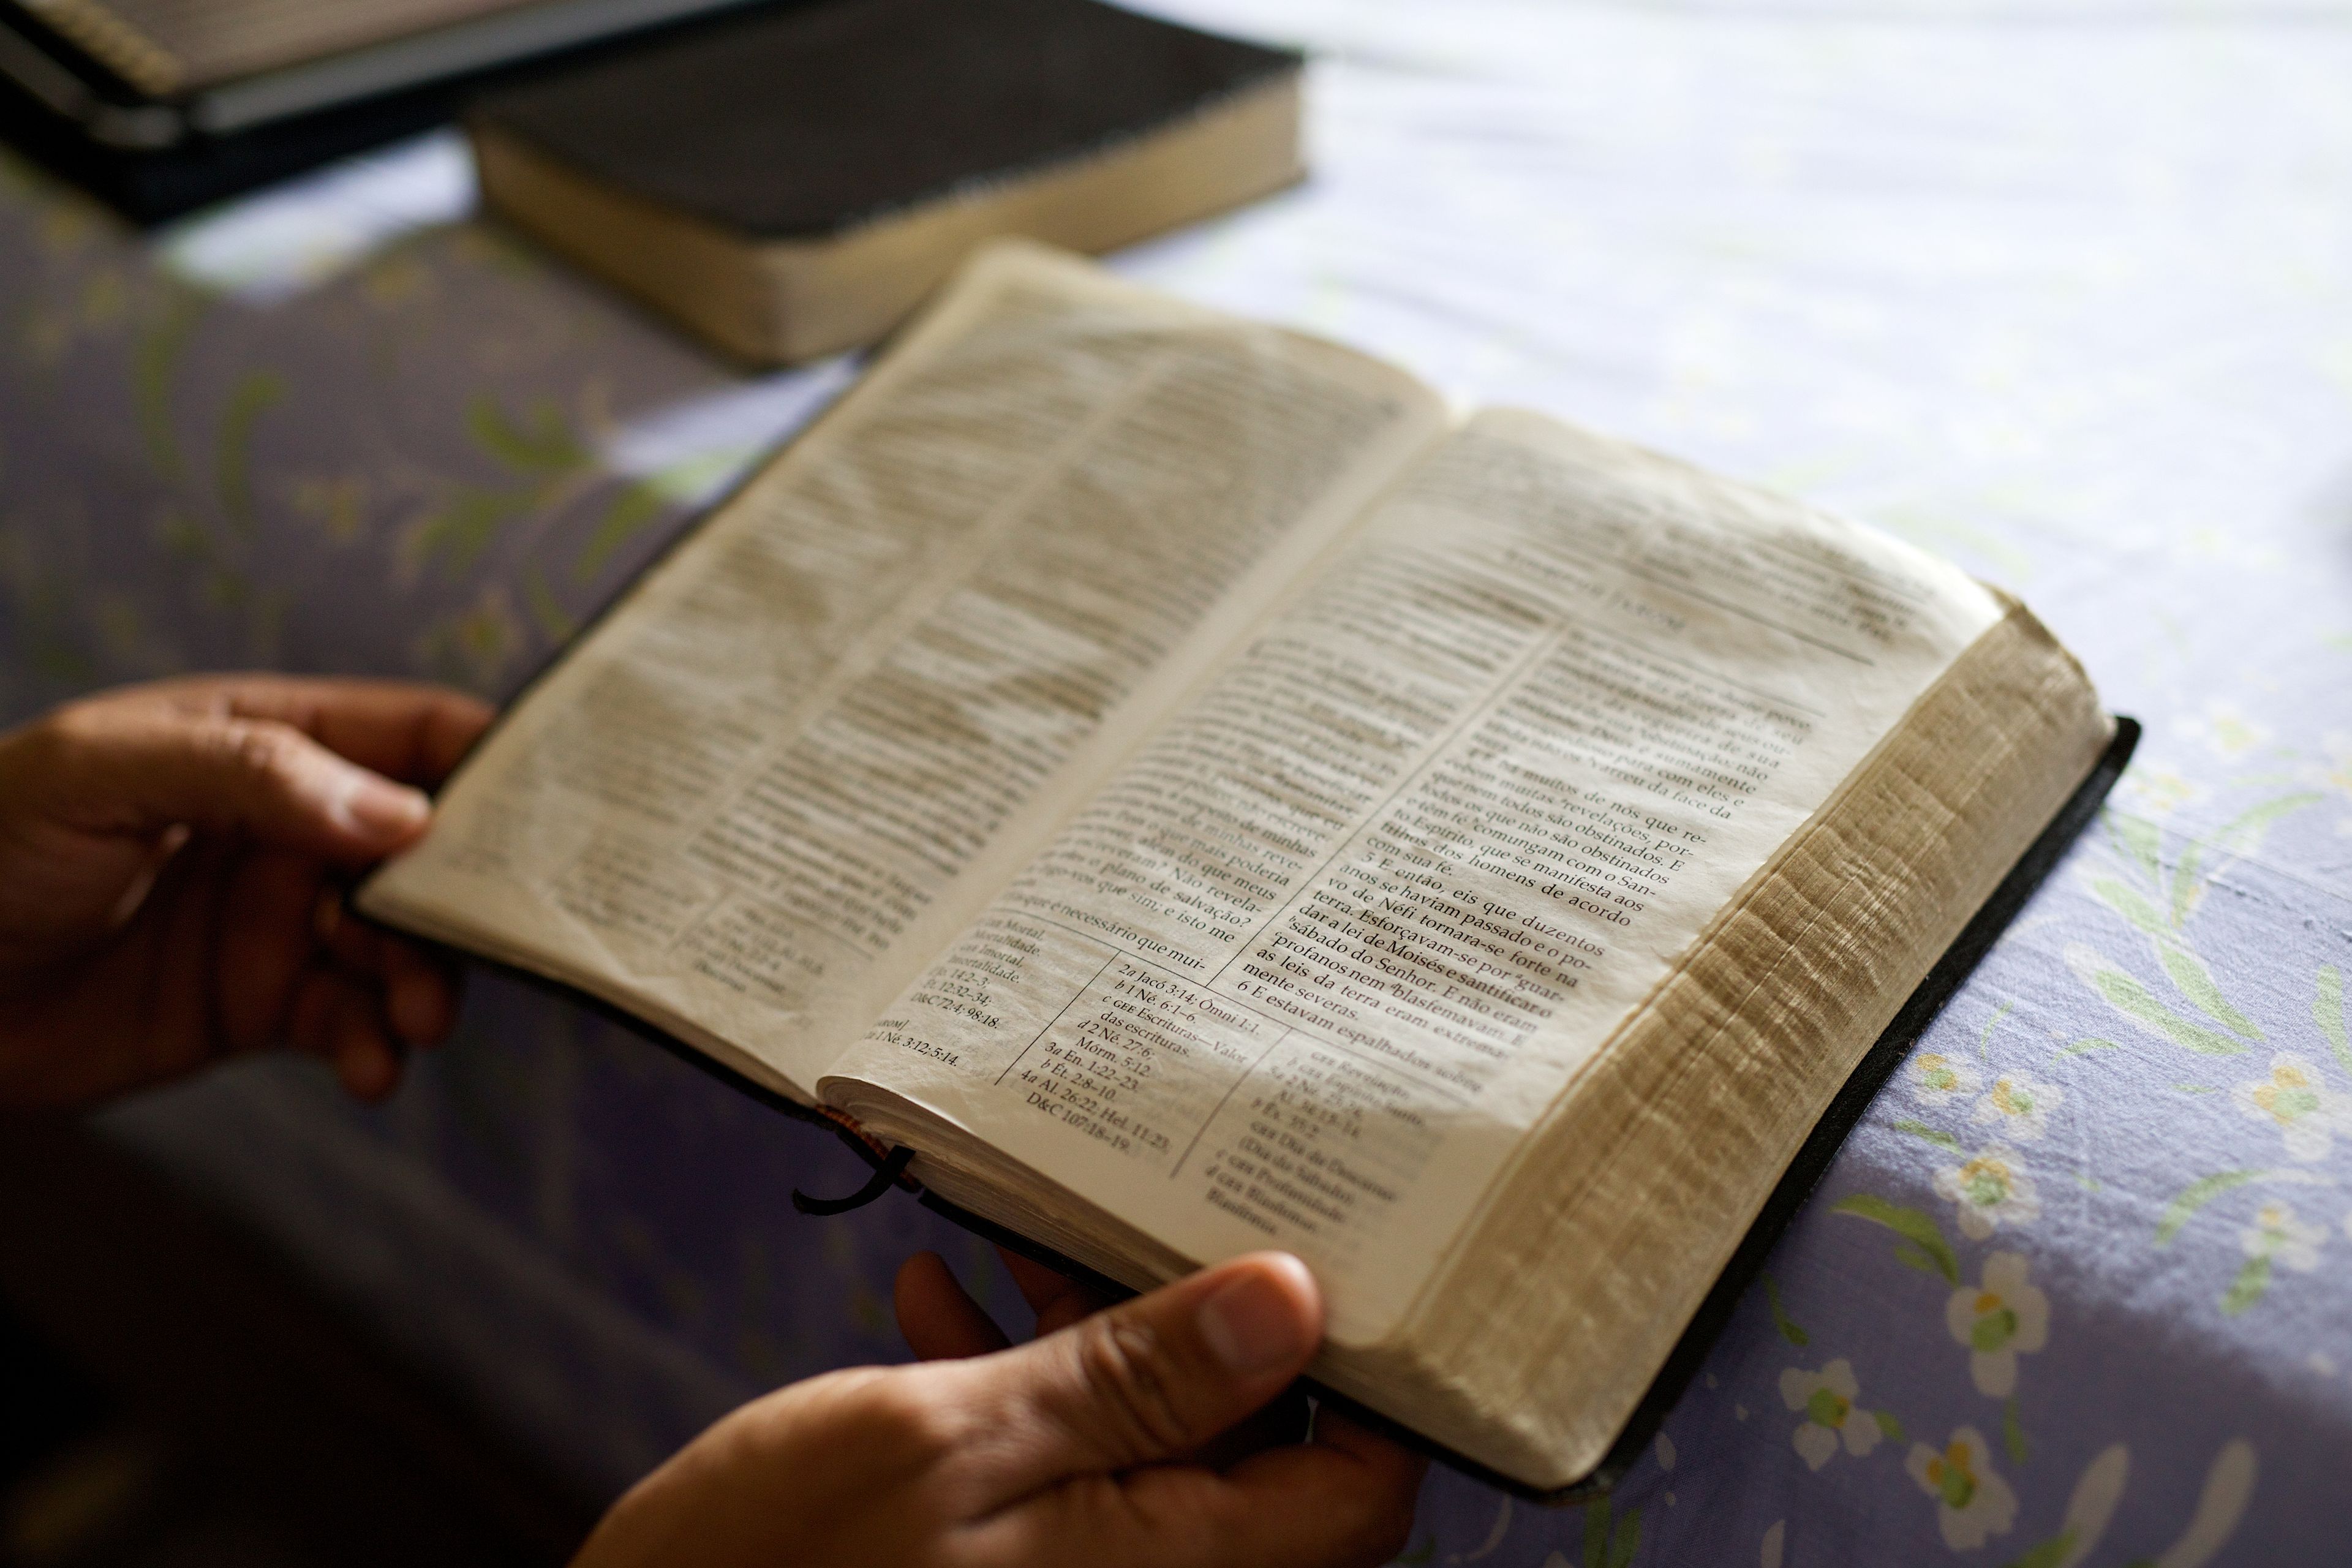 A well-used hardbound set of Portuguese scriptures being held open on a table.